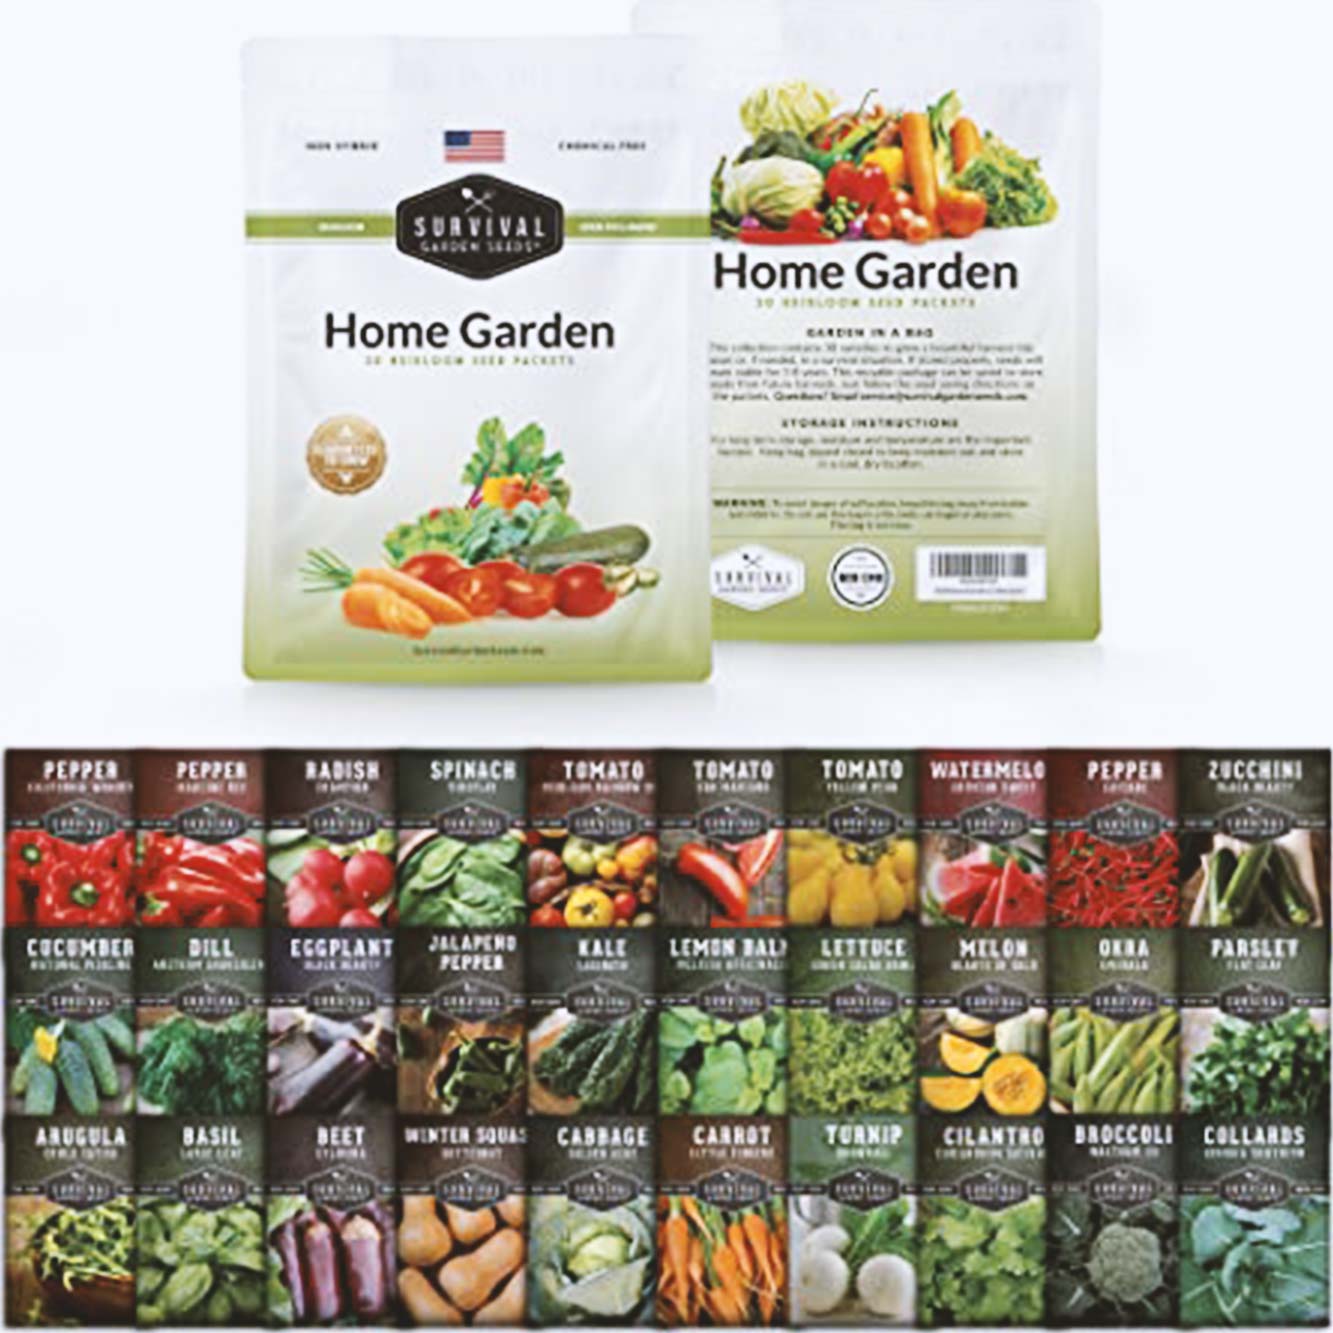 Seeds and Growing kits